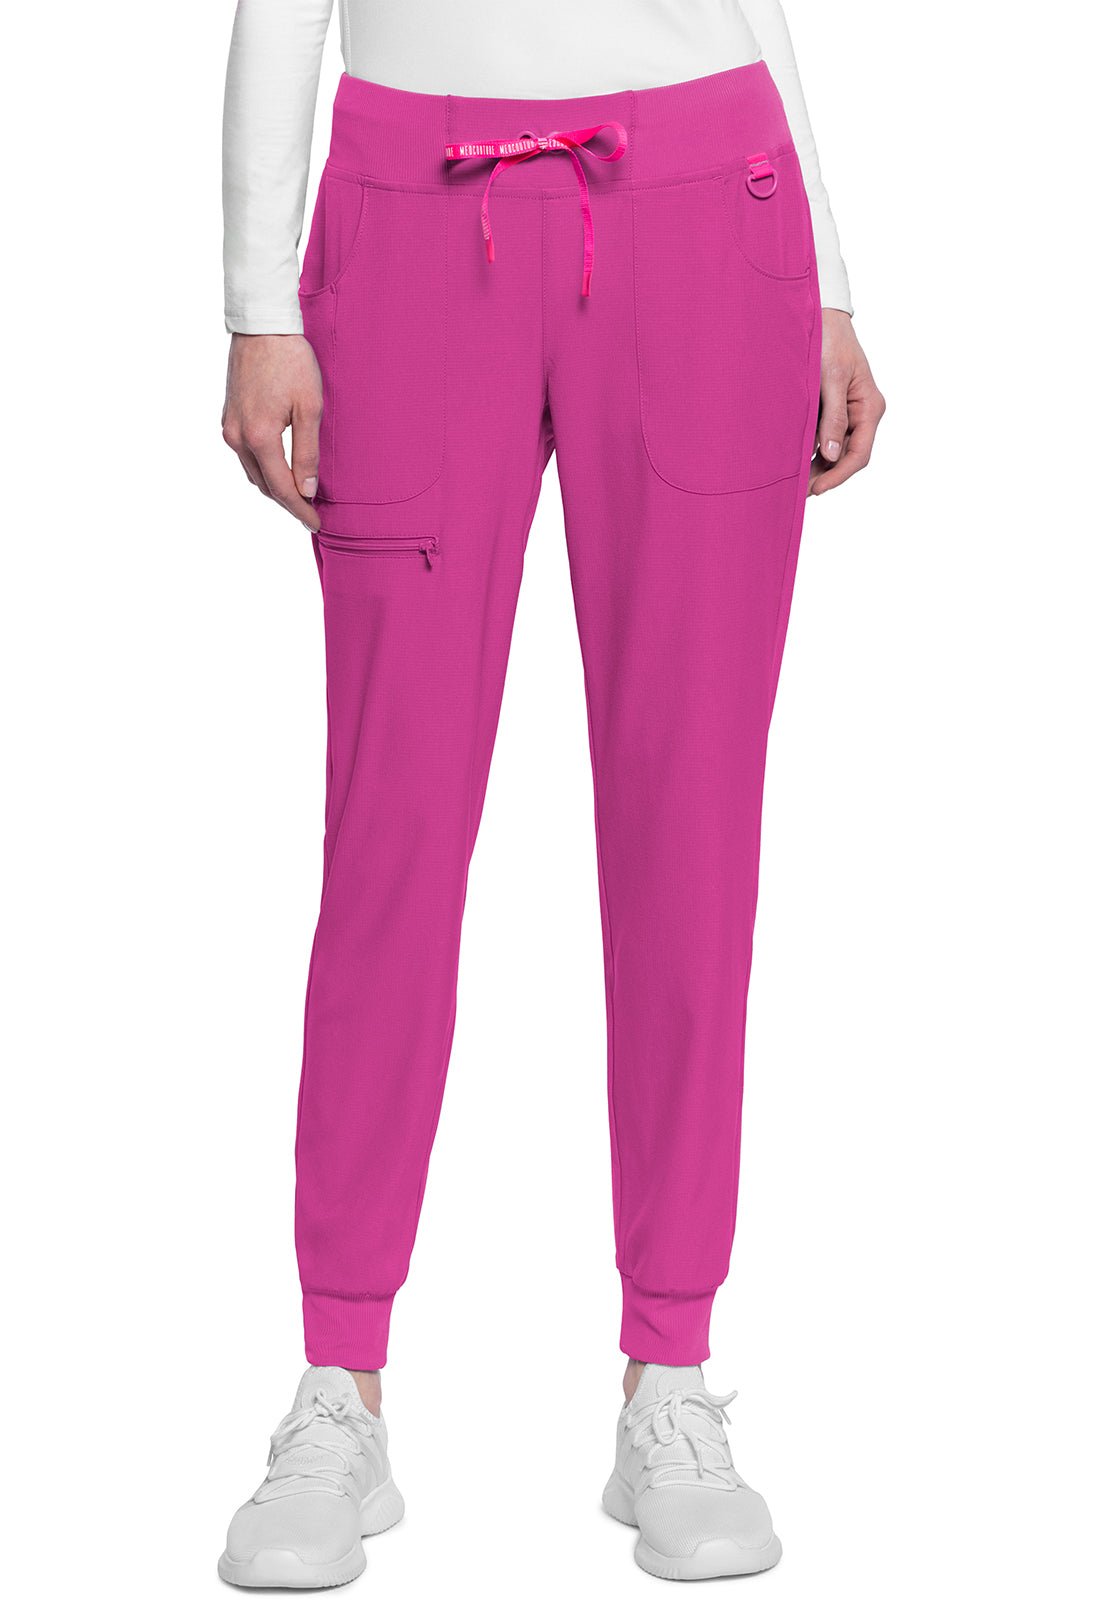 Med Couture AMP Jogger Scrub Pant MC102 in Hyper Blue, Purple Surge, Ultra Magenta - Scrubs Select